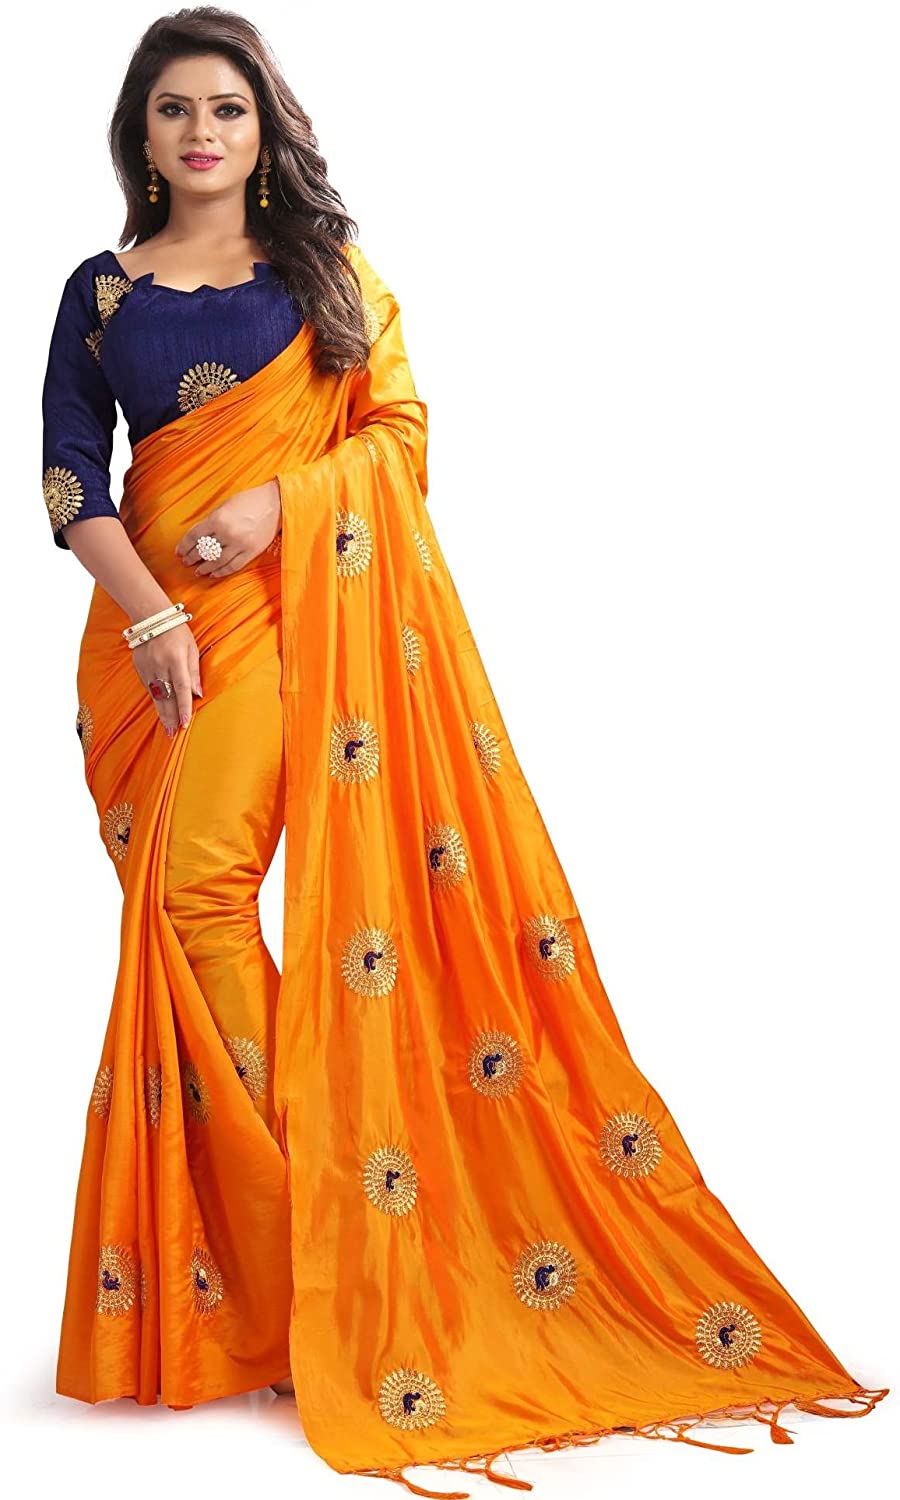 kfgroup Womens Paper Silk Embroidered Saree Indian Ethnic Dresses Wedding Sari with Blouse